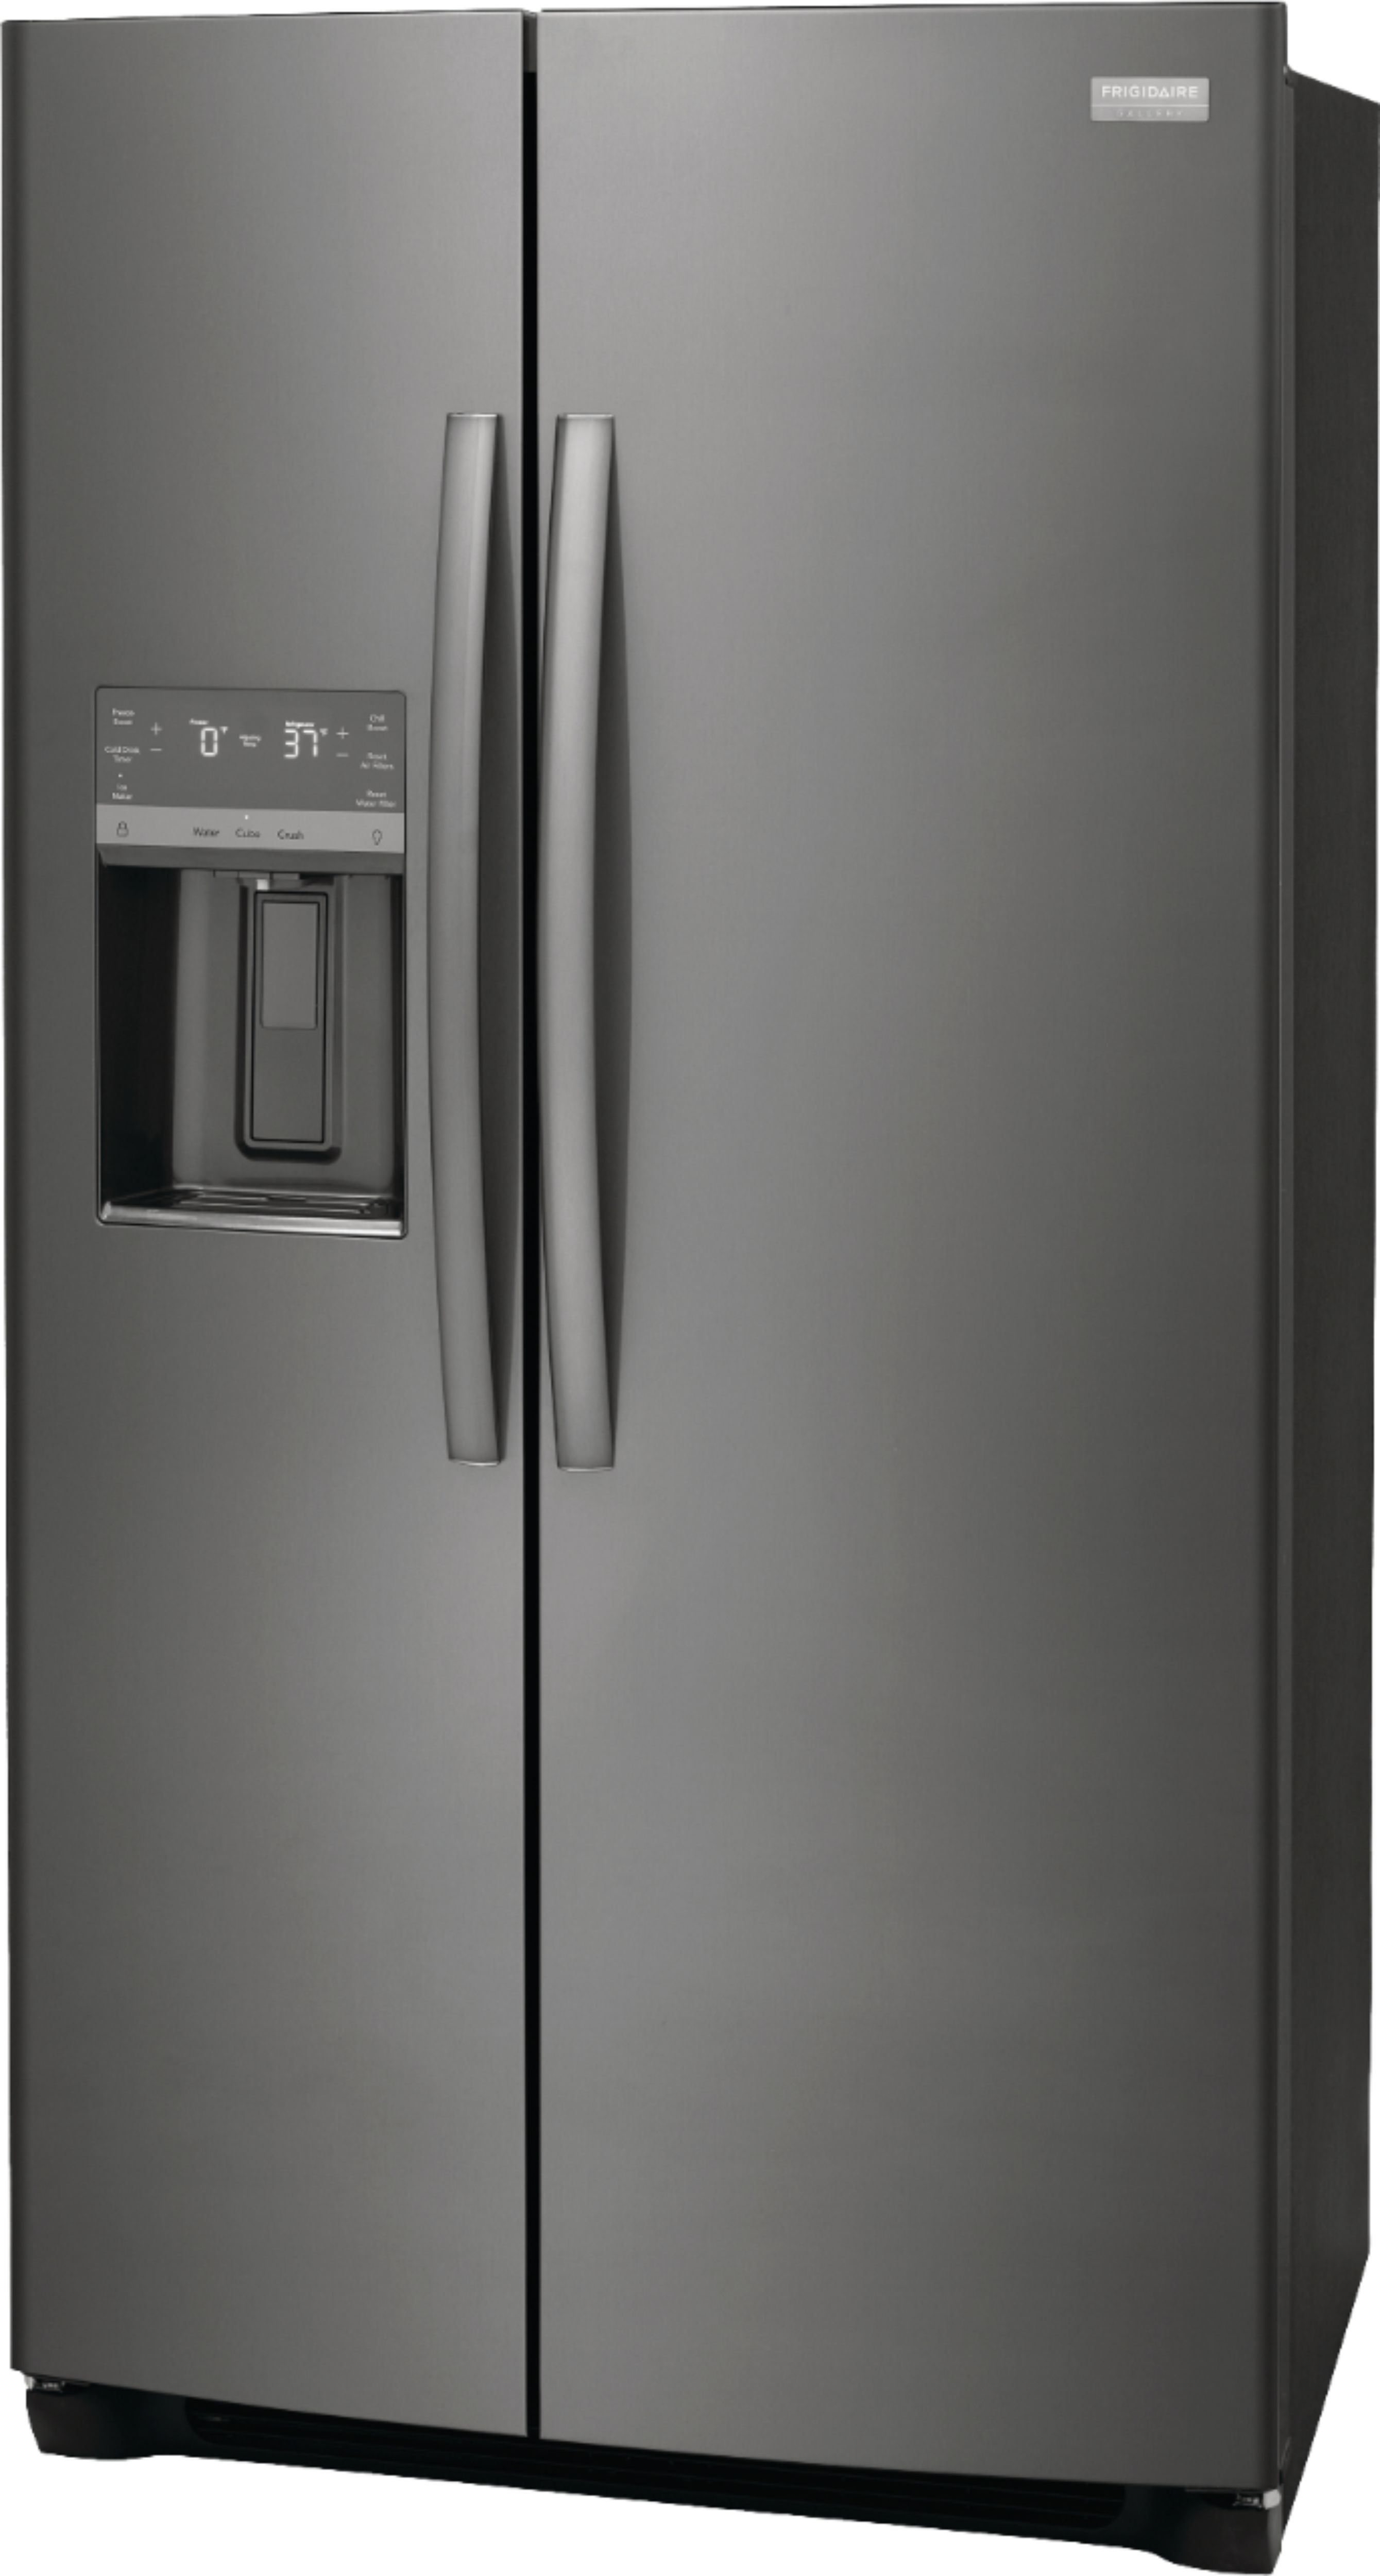 Angle View: Samsung - 27.4 cu. ft. Side-by-Side Refrigerator with WiFi and Large Capacity - Stainless steel